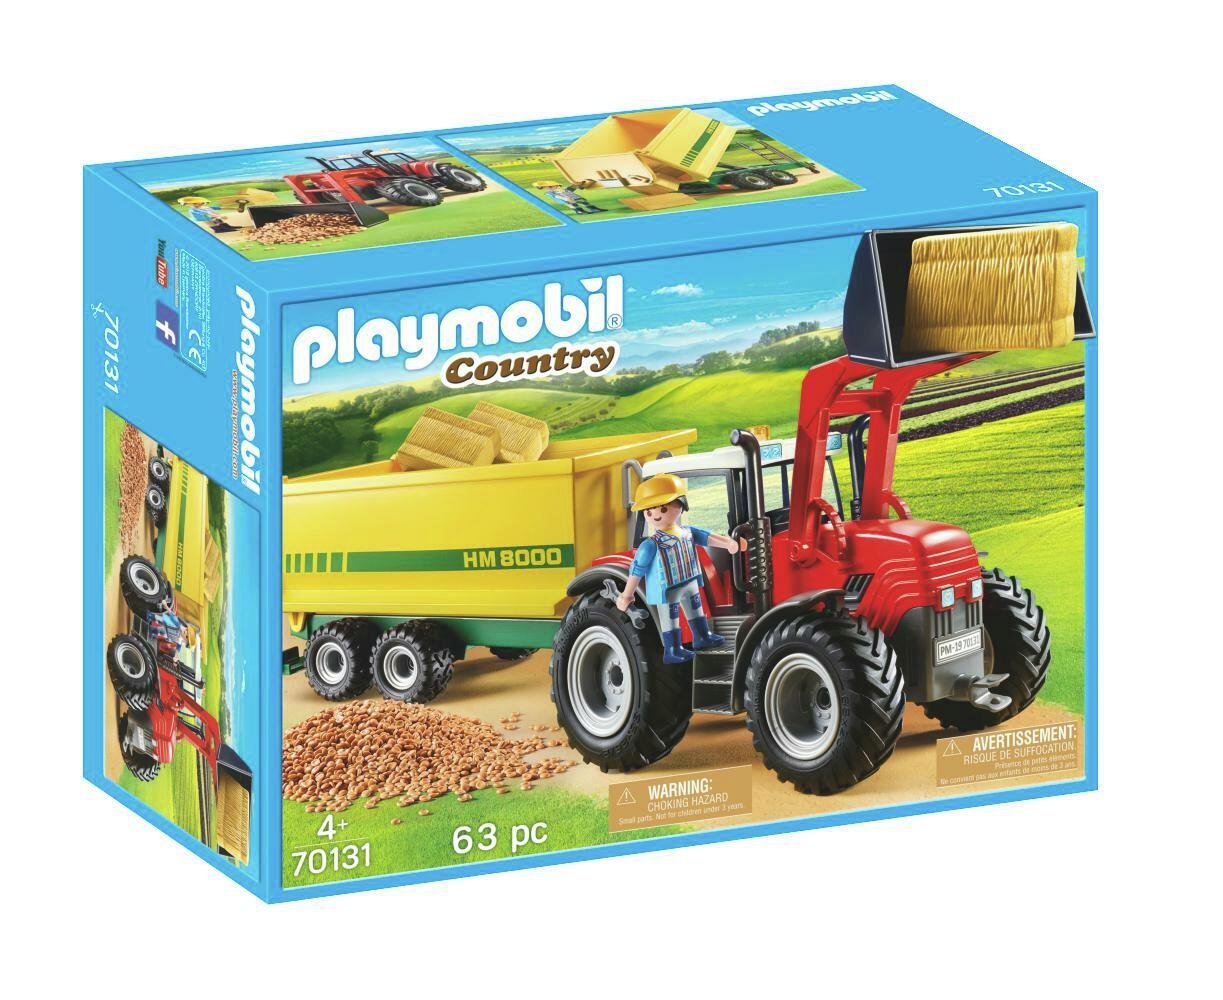 Playmobil 70131 Tractor and Feed Trailer Review